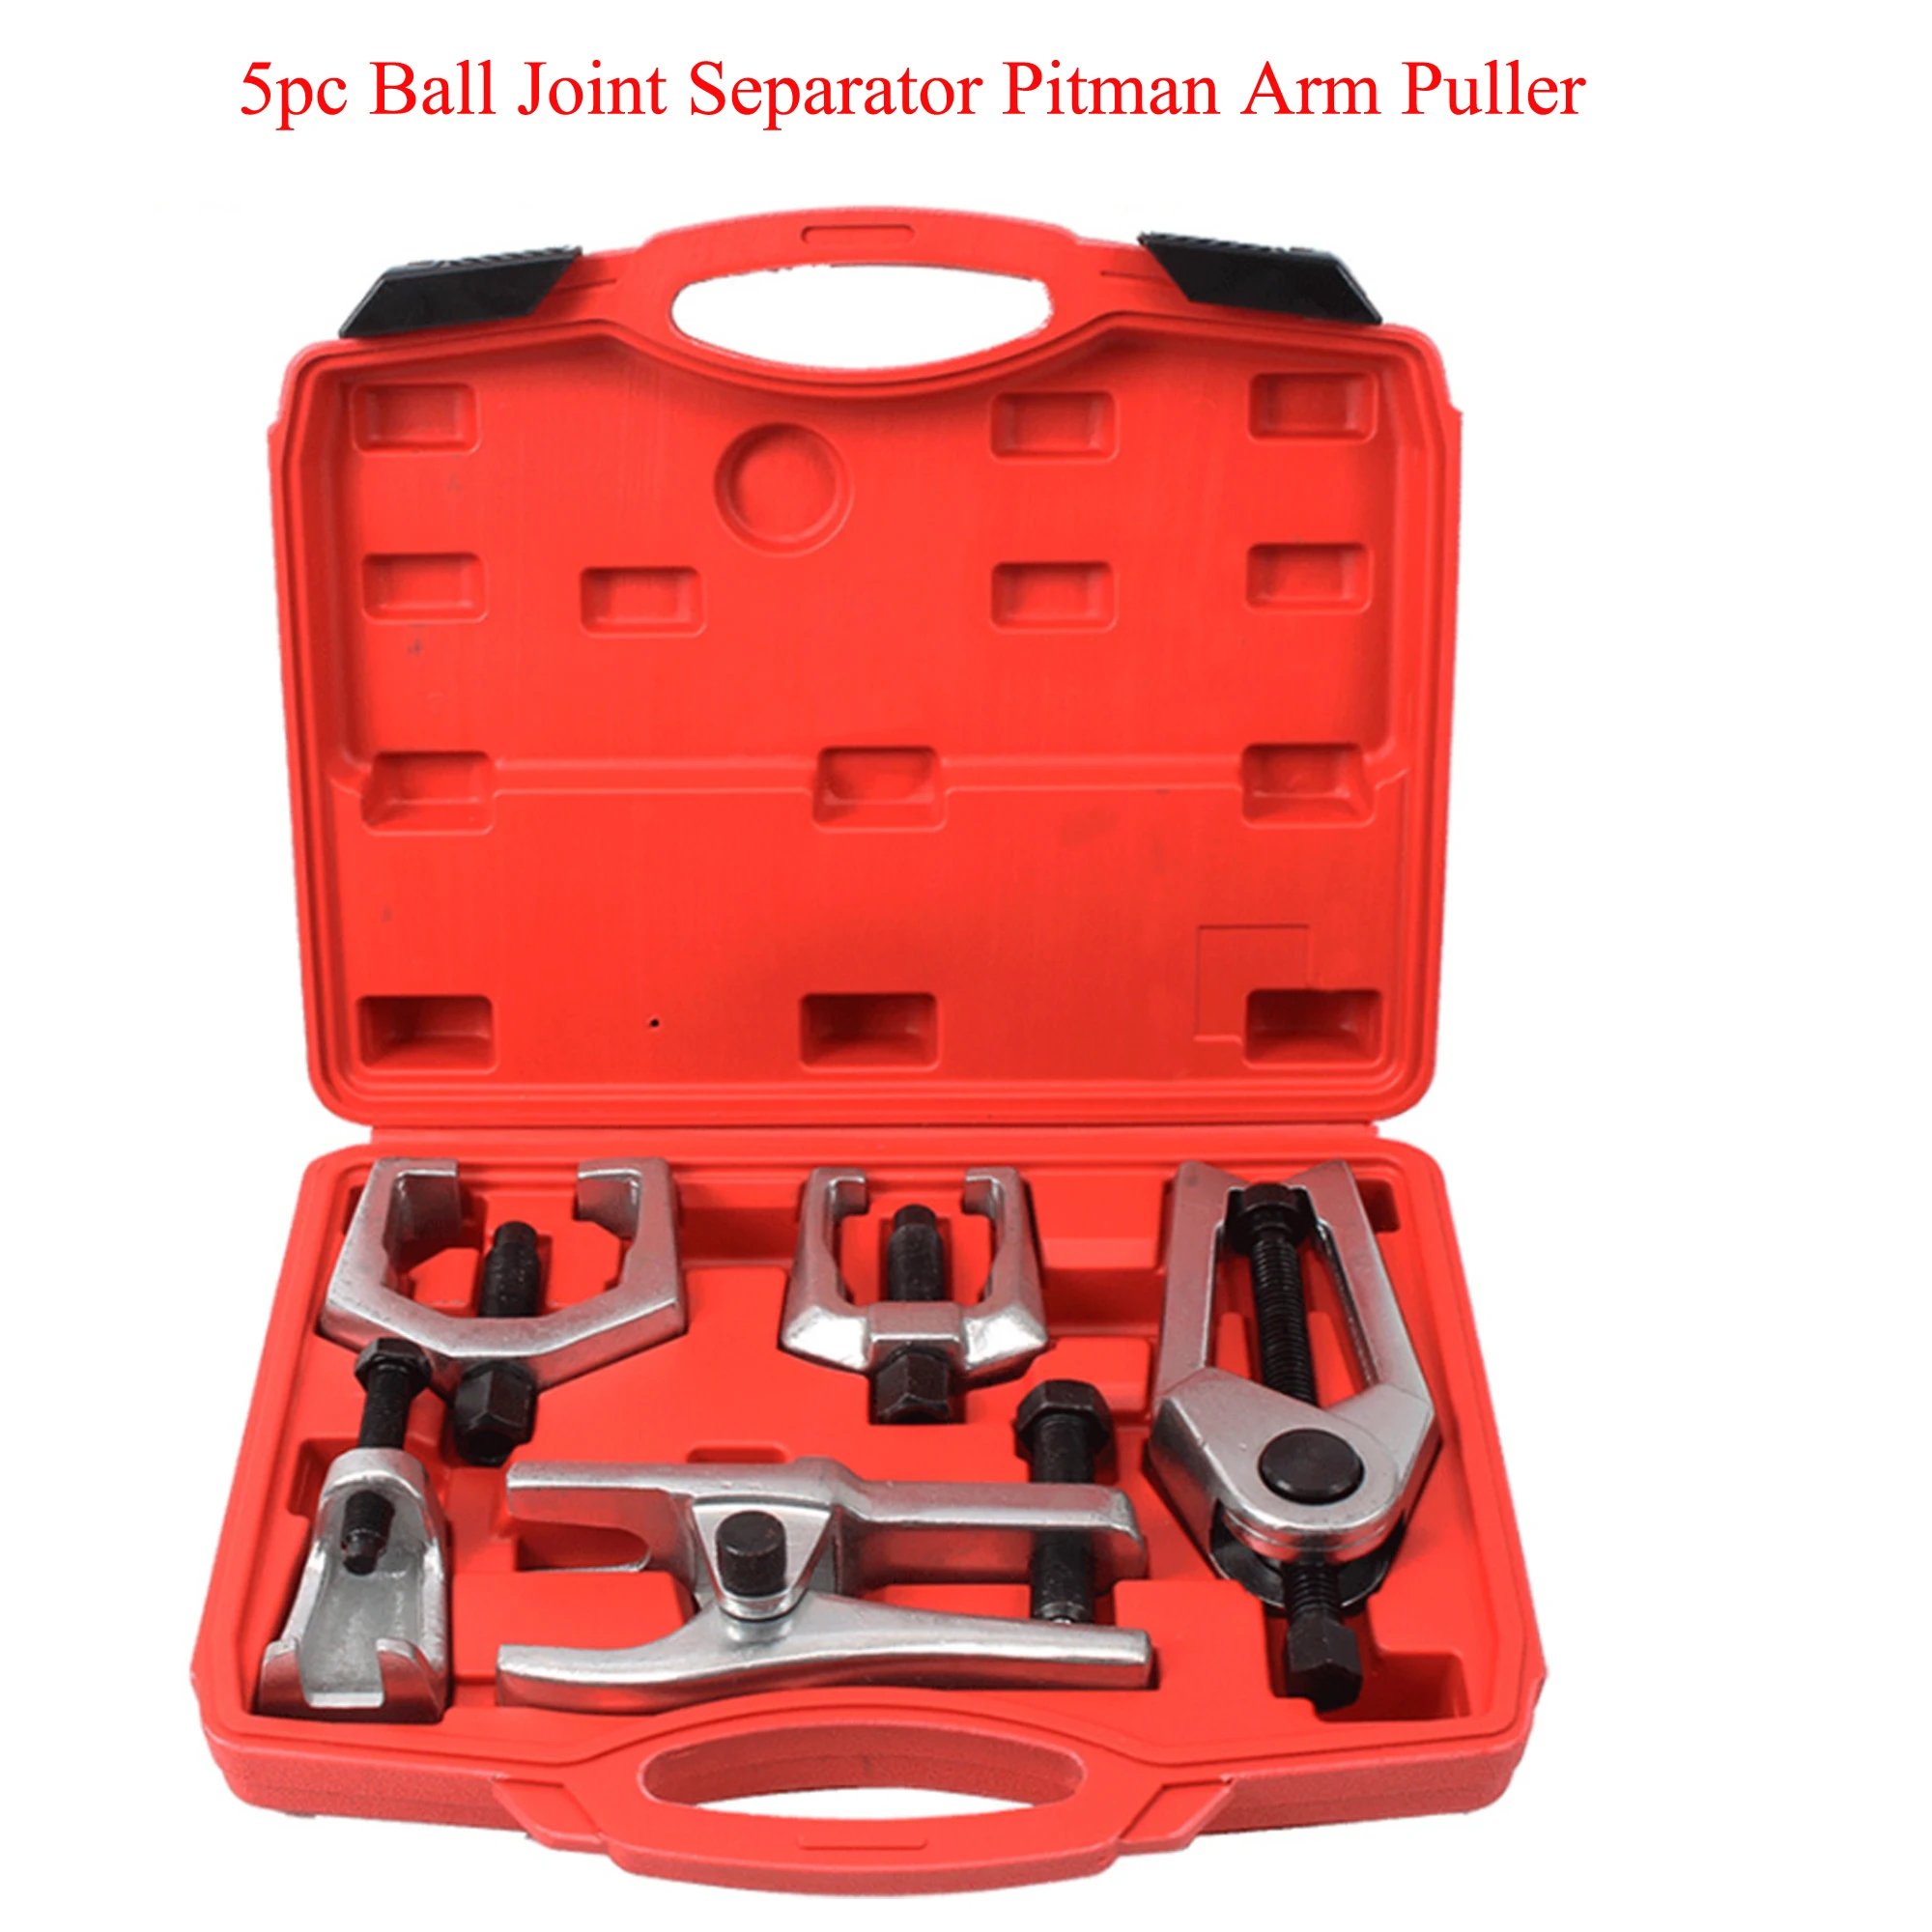 

5-in-1 Ball Joint Separator Pitman Arm Puller Tie Rod End Tool Set for Front End Service, Splitter Removal Kit